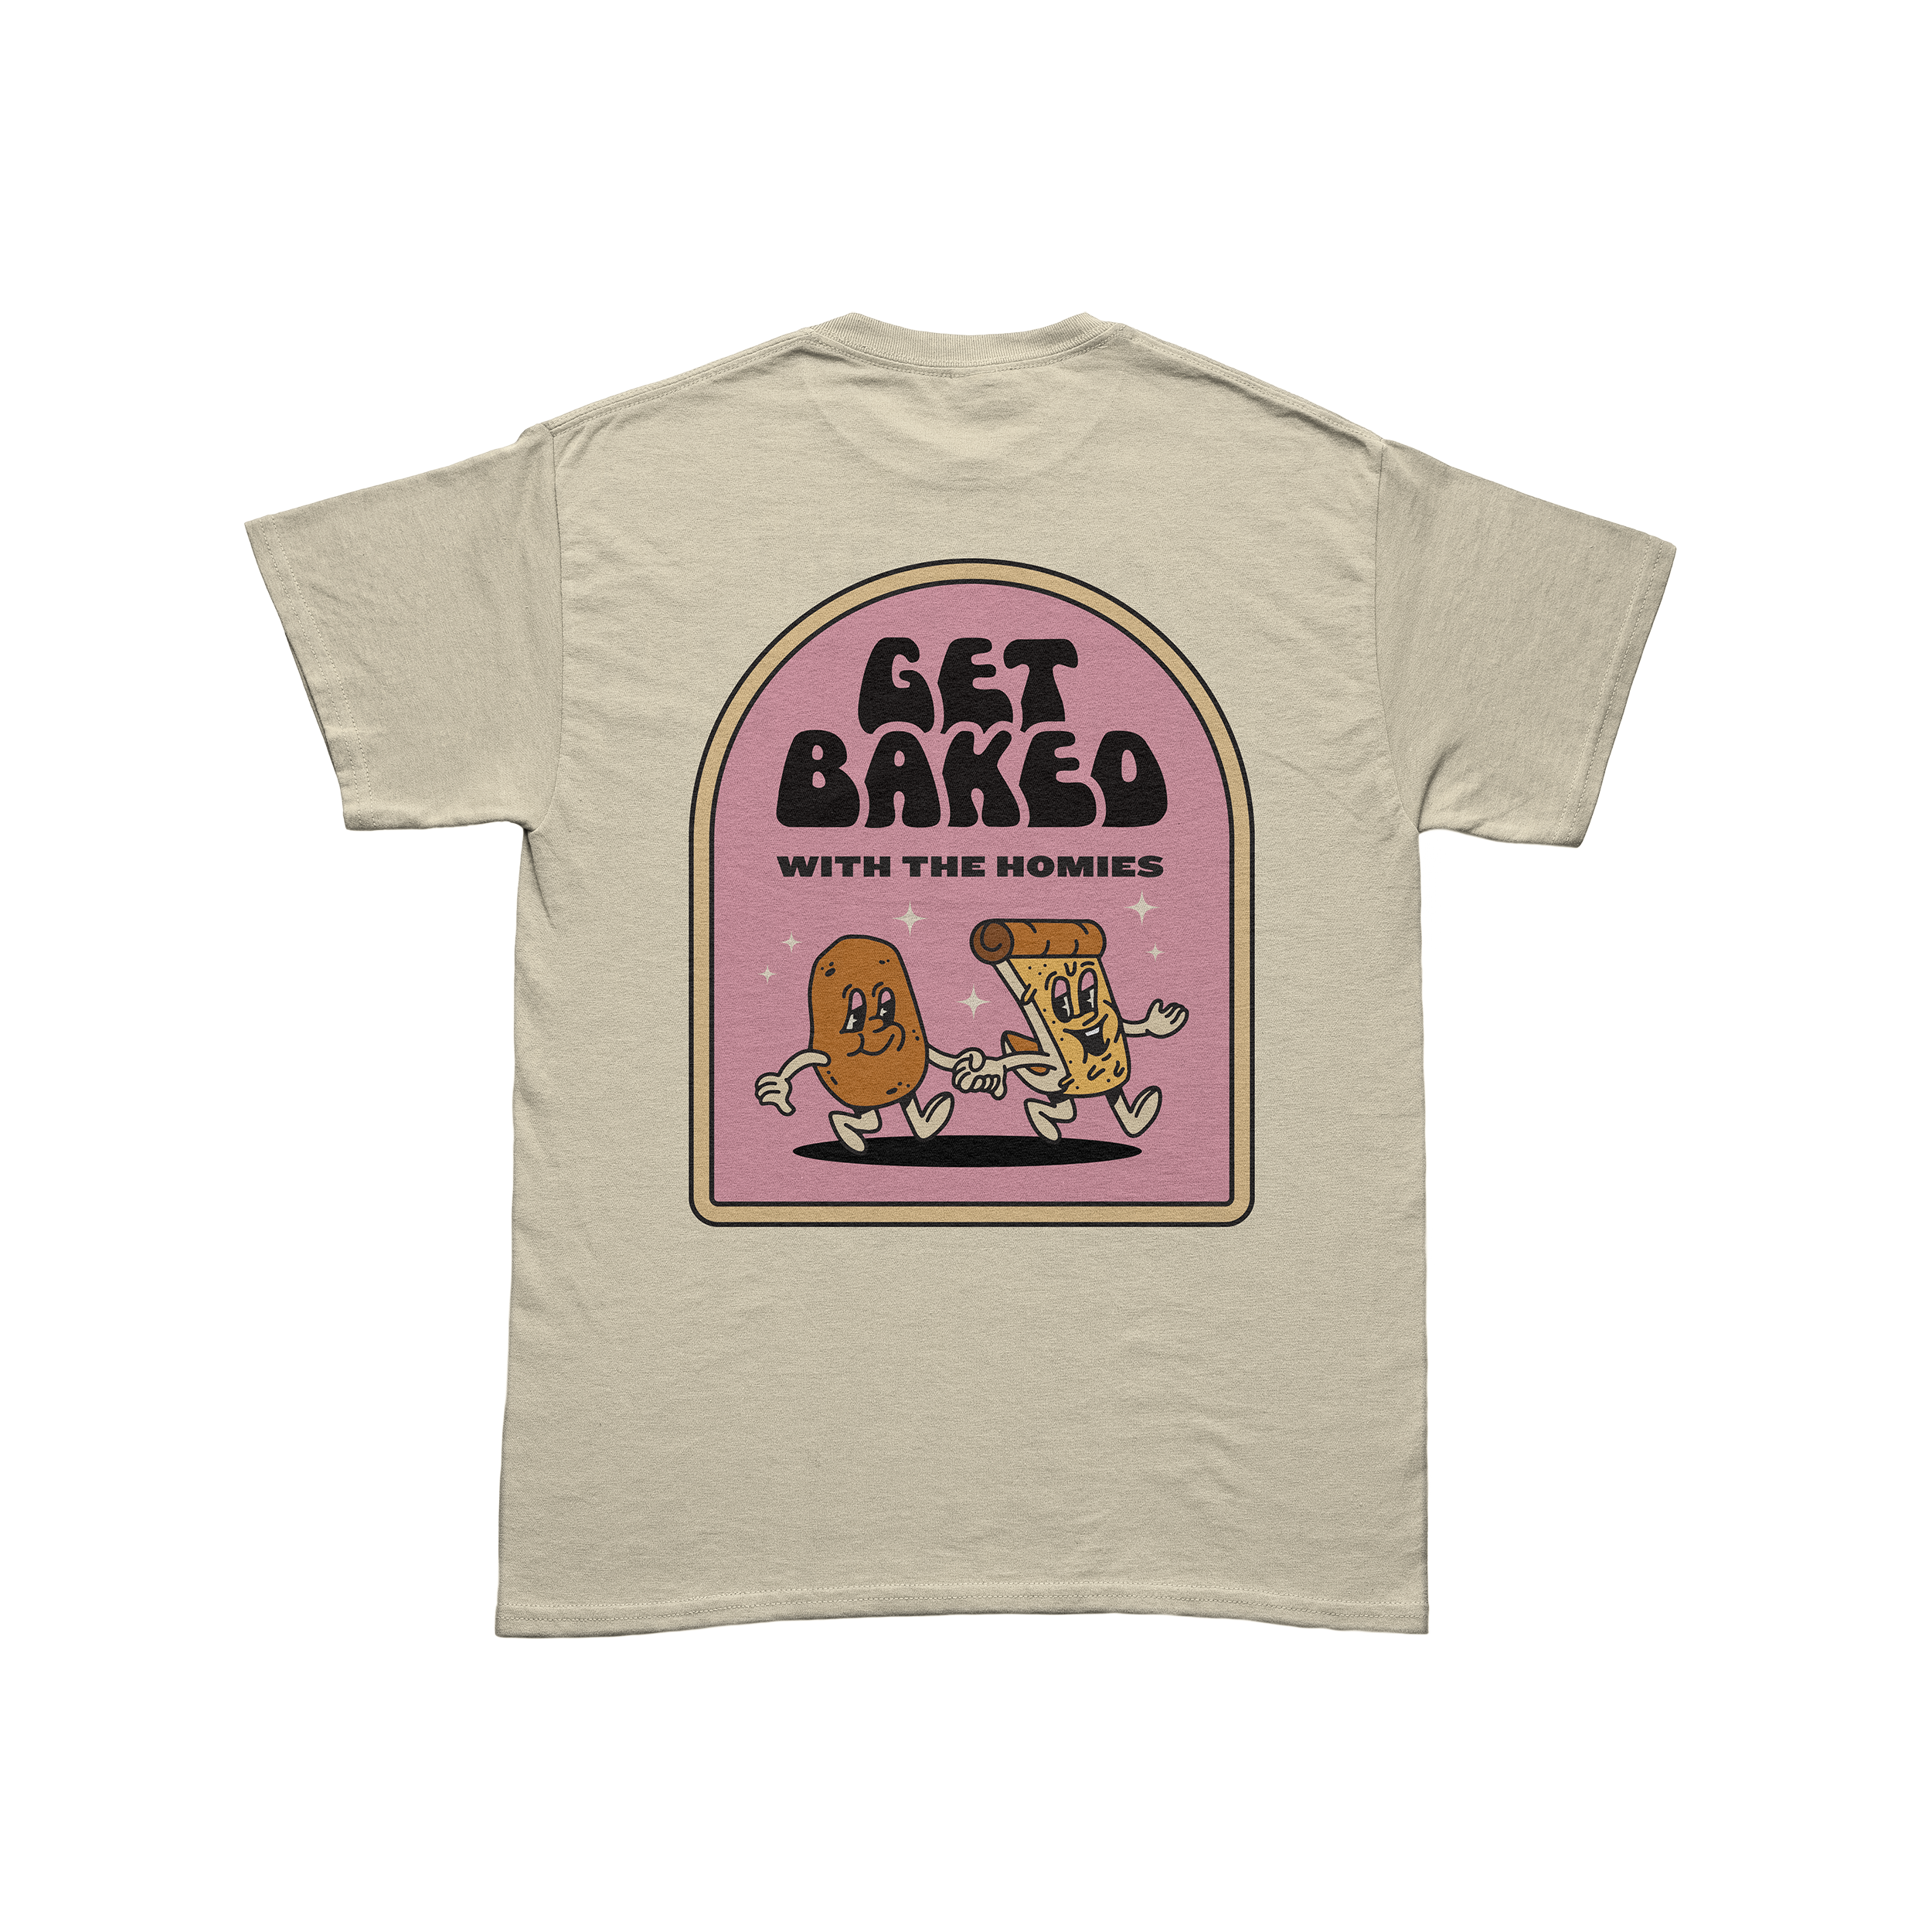 GBKD-Tee-2-BACK.png